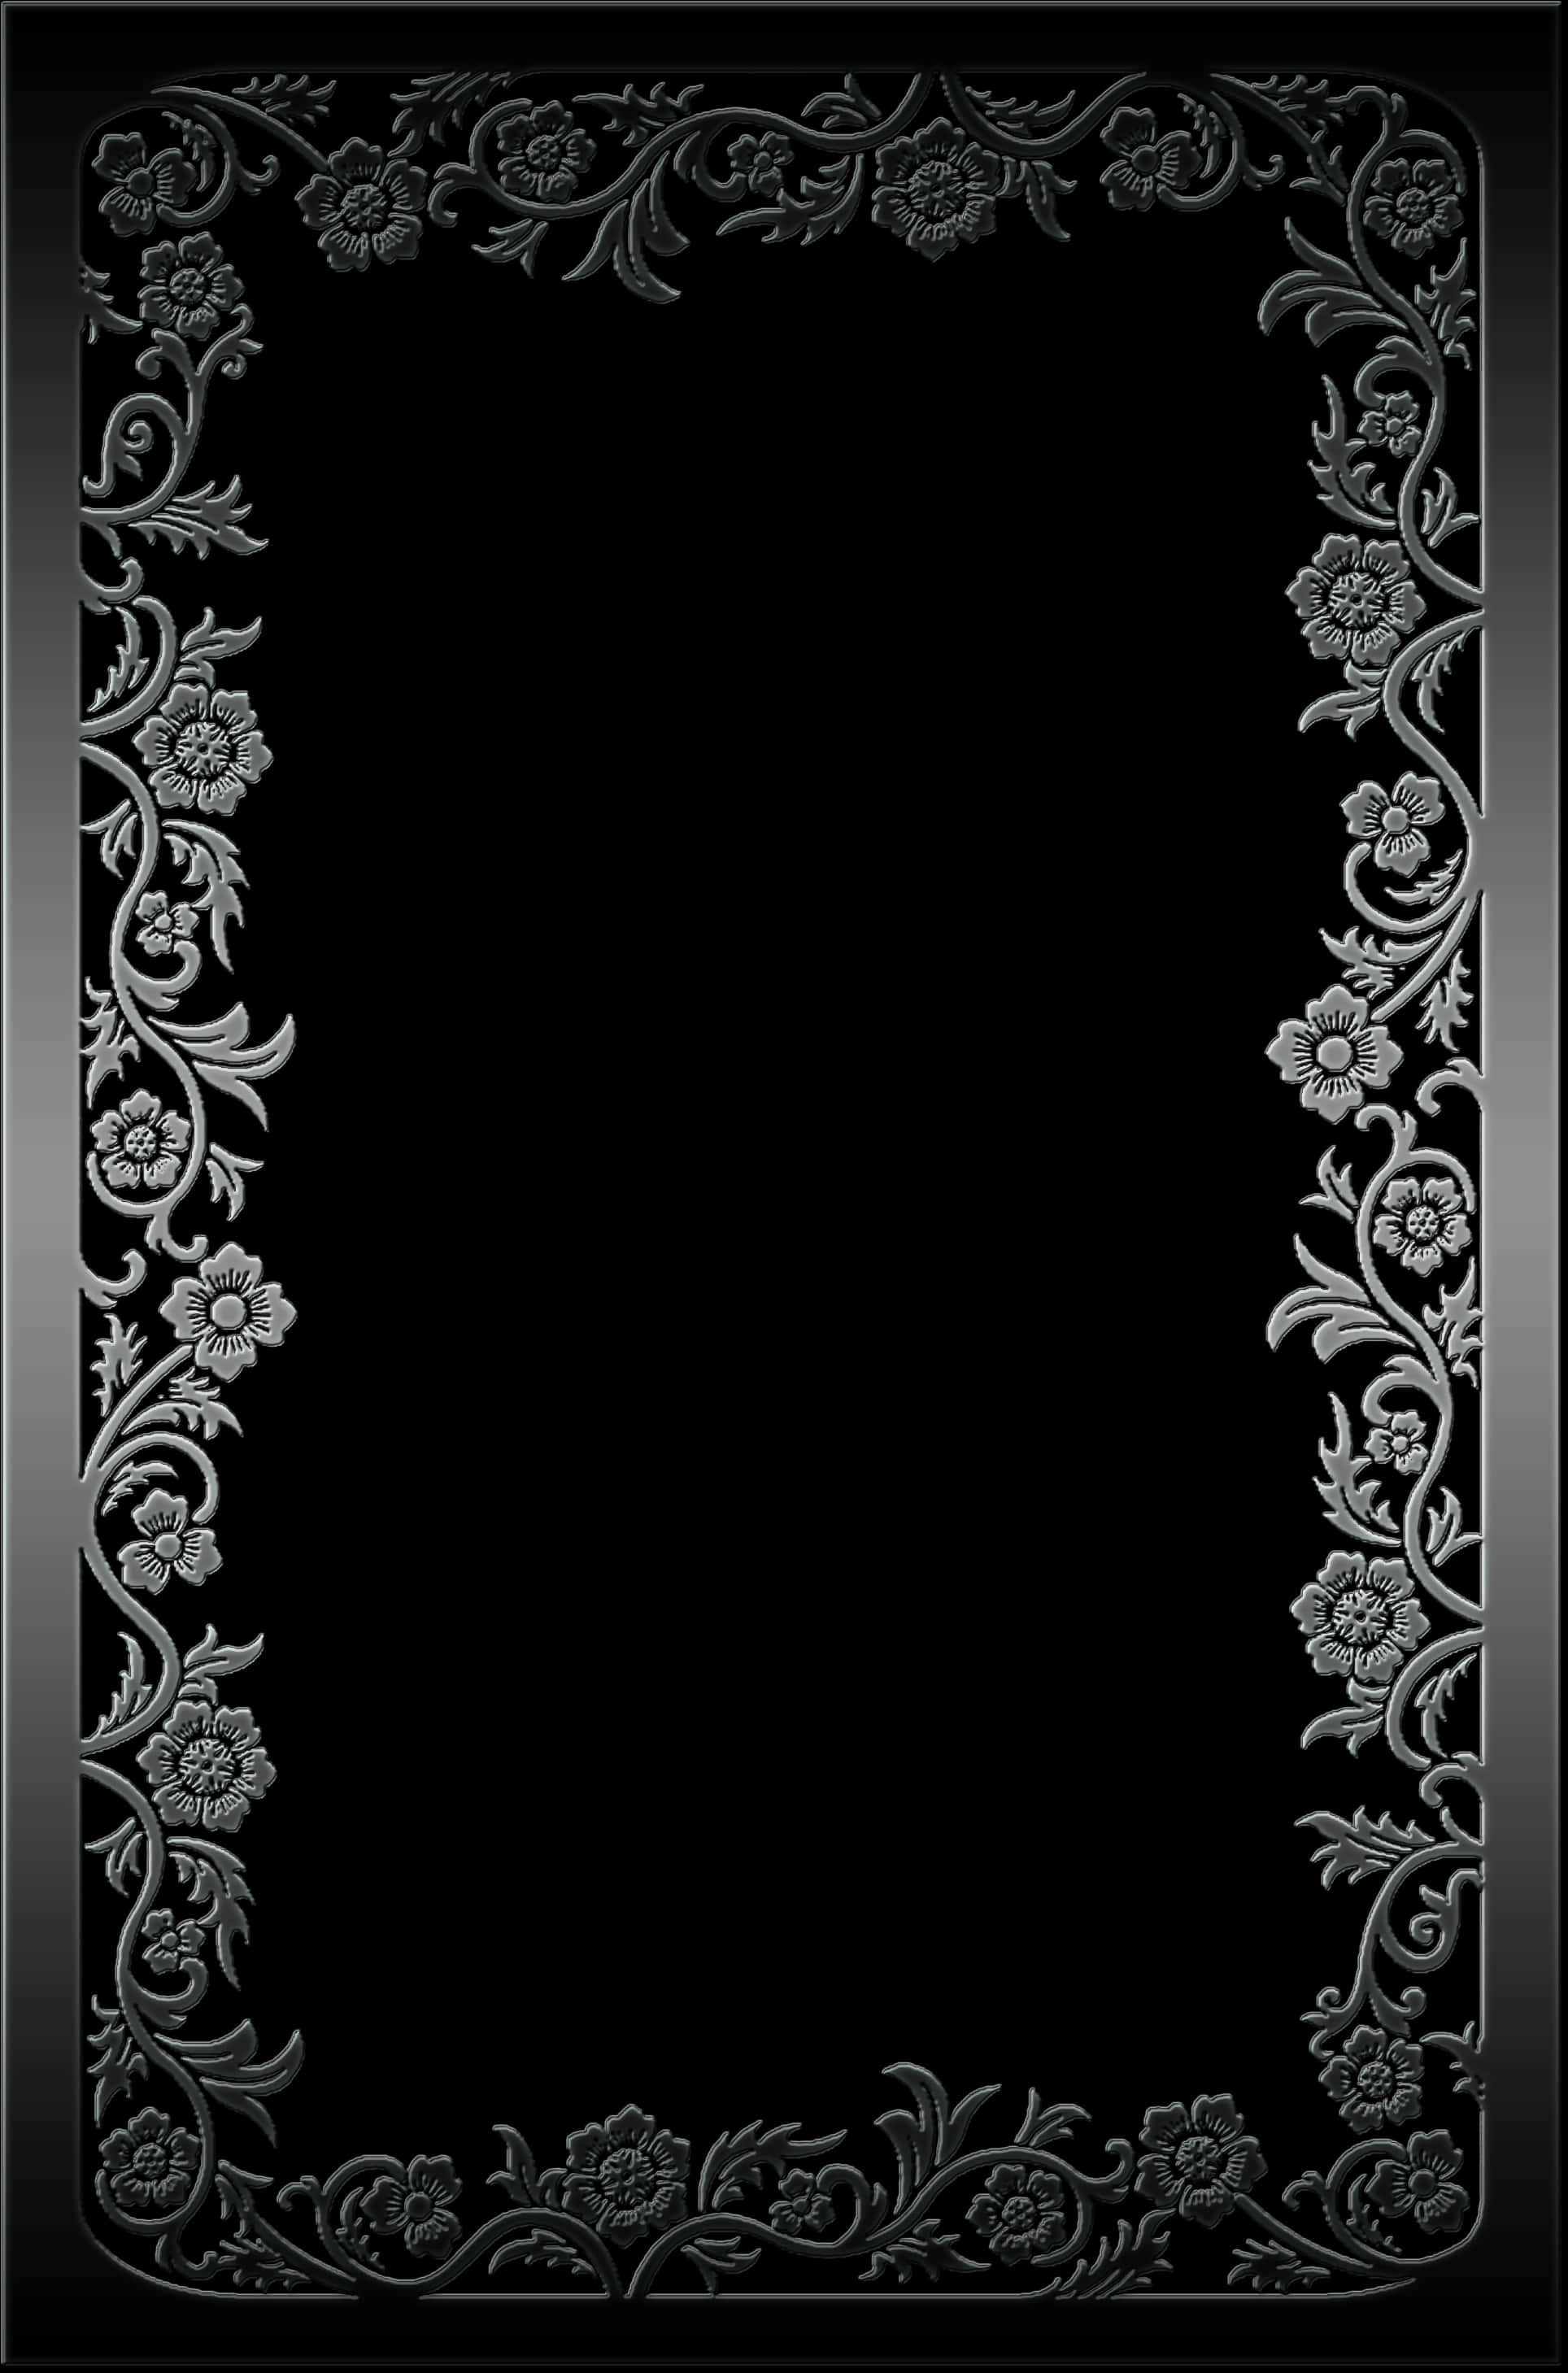 A Black And Silver Rectangular Frame With Flowers And Leaves